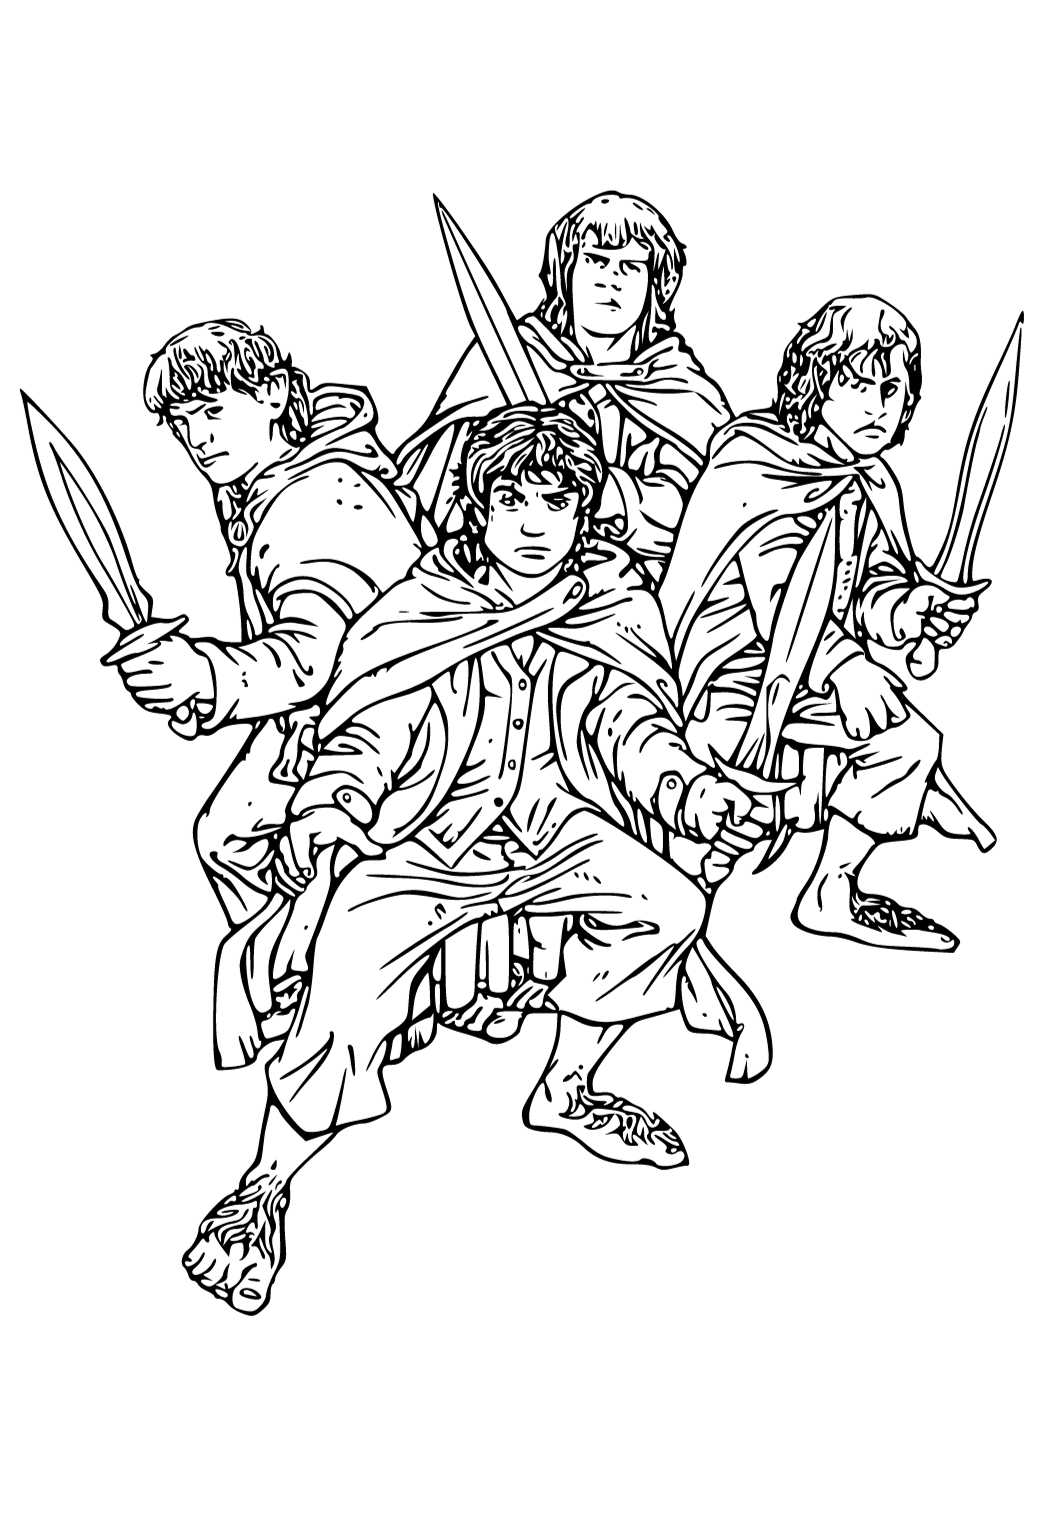 Free printable lord of the rings characters coloring page for adults and kids